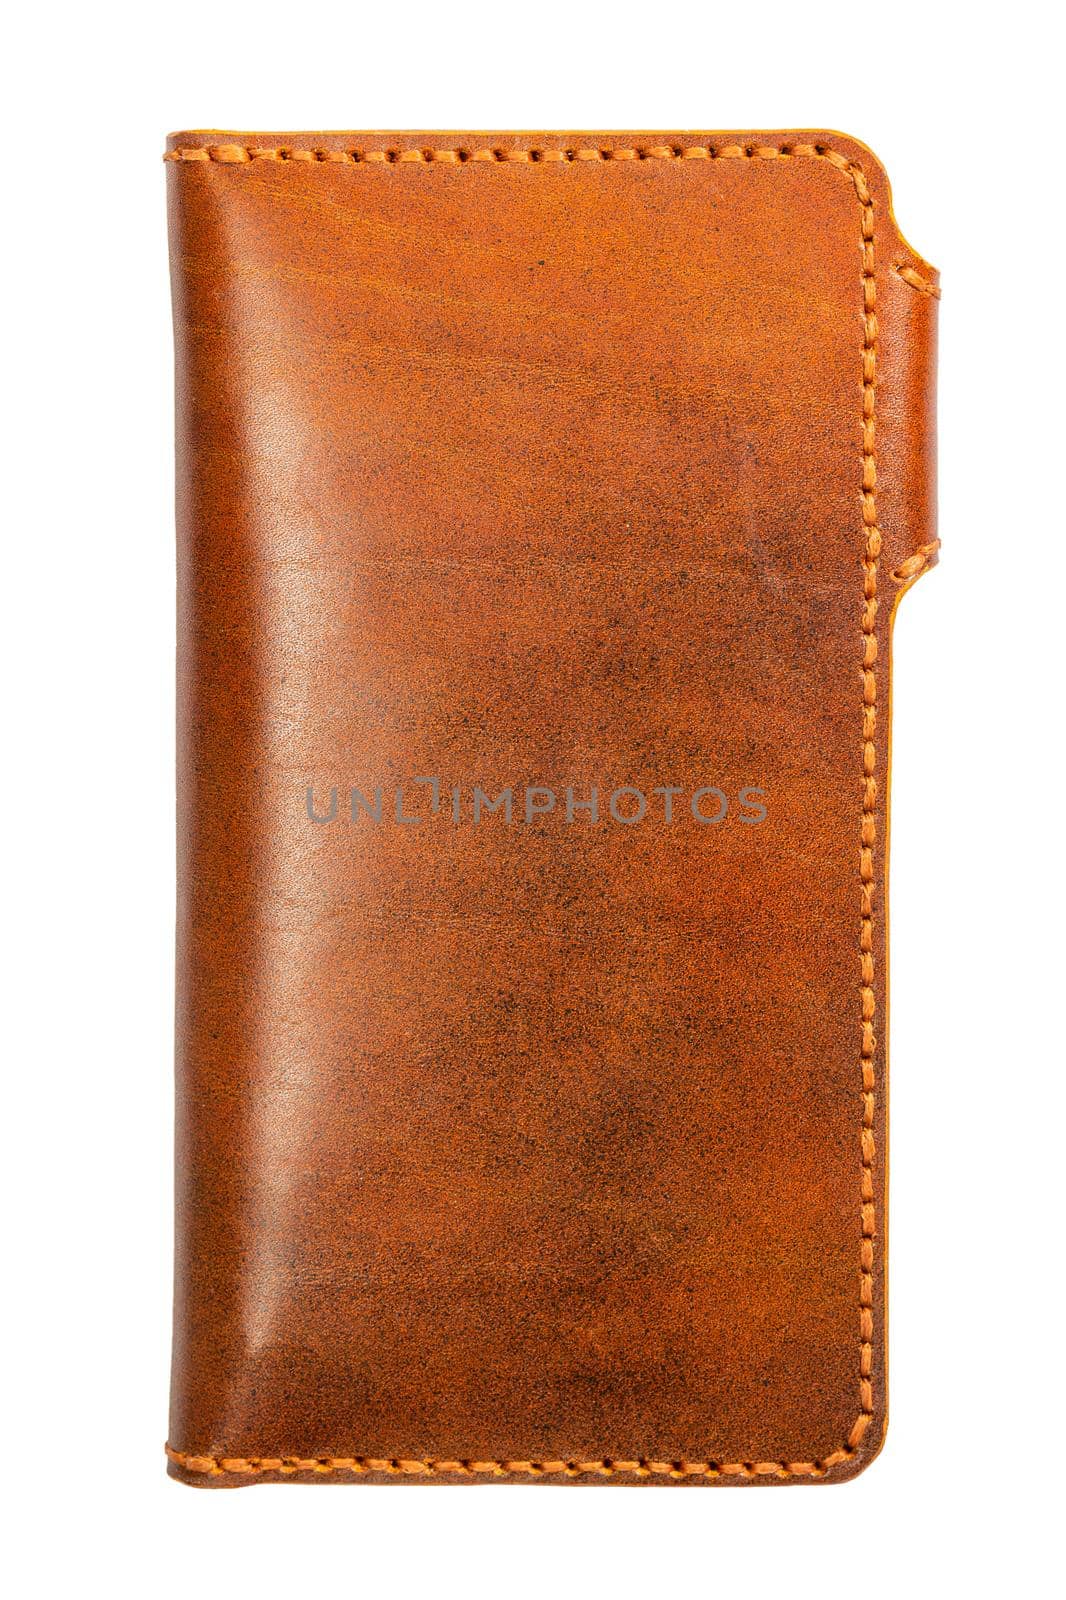 Brown natural leather women wallet isolated on white background. Back side.